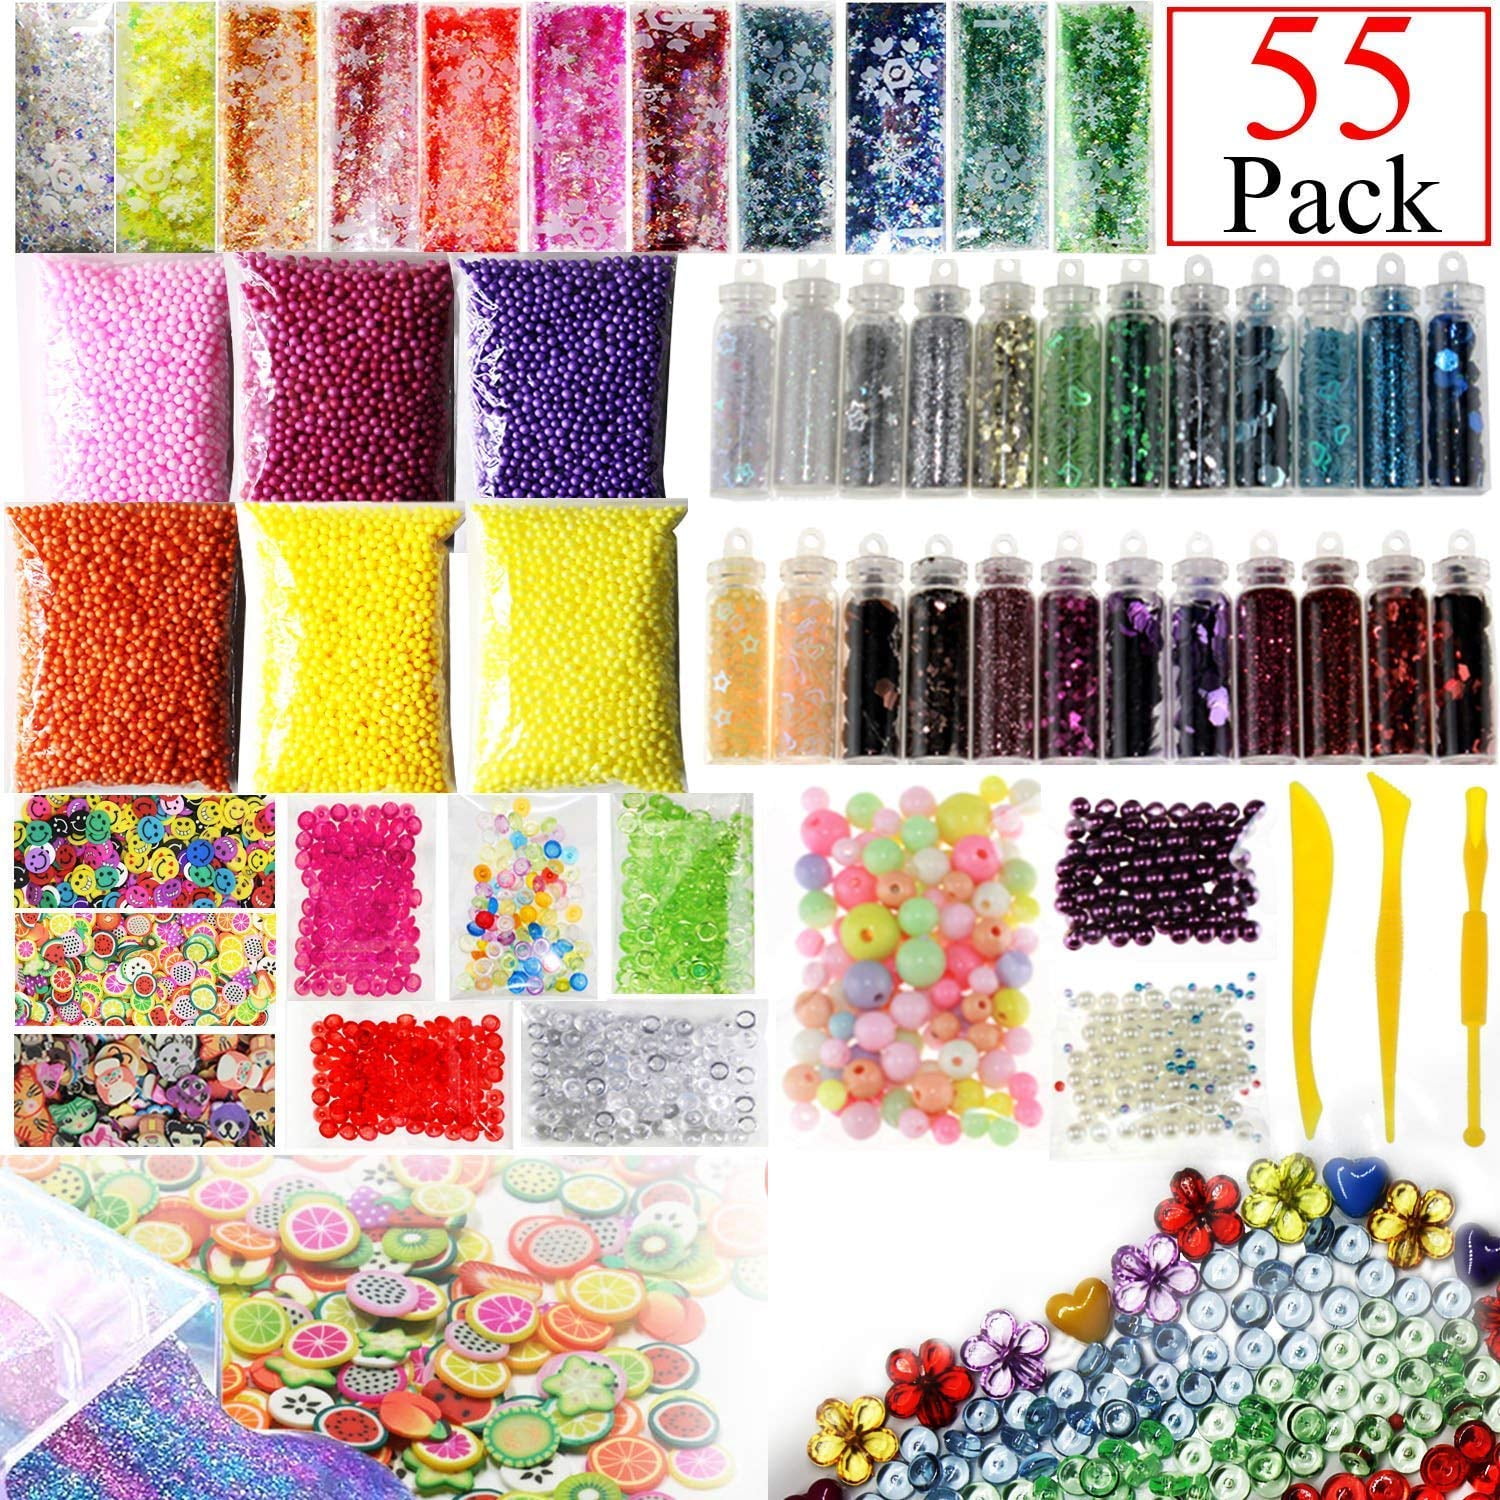 Simulation Rice Beads Fishbowl Beads Slime Accessories Polymer Clay Charms  DIY Mixed Materials Crystal Mud Slime Filler 